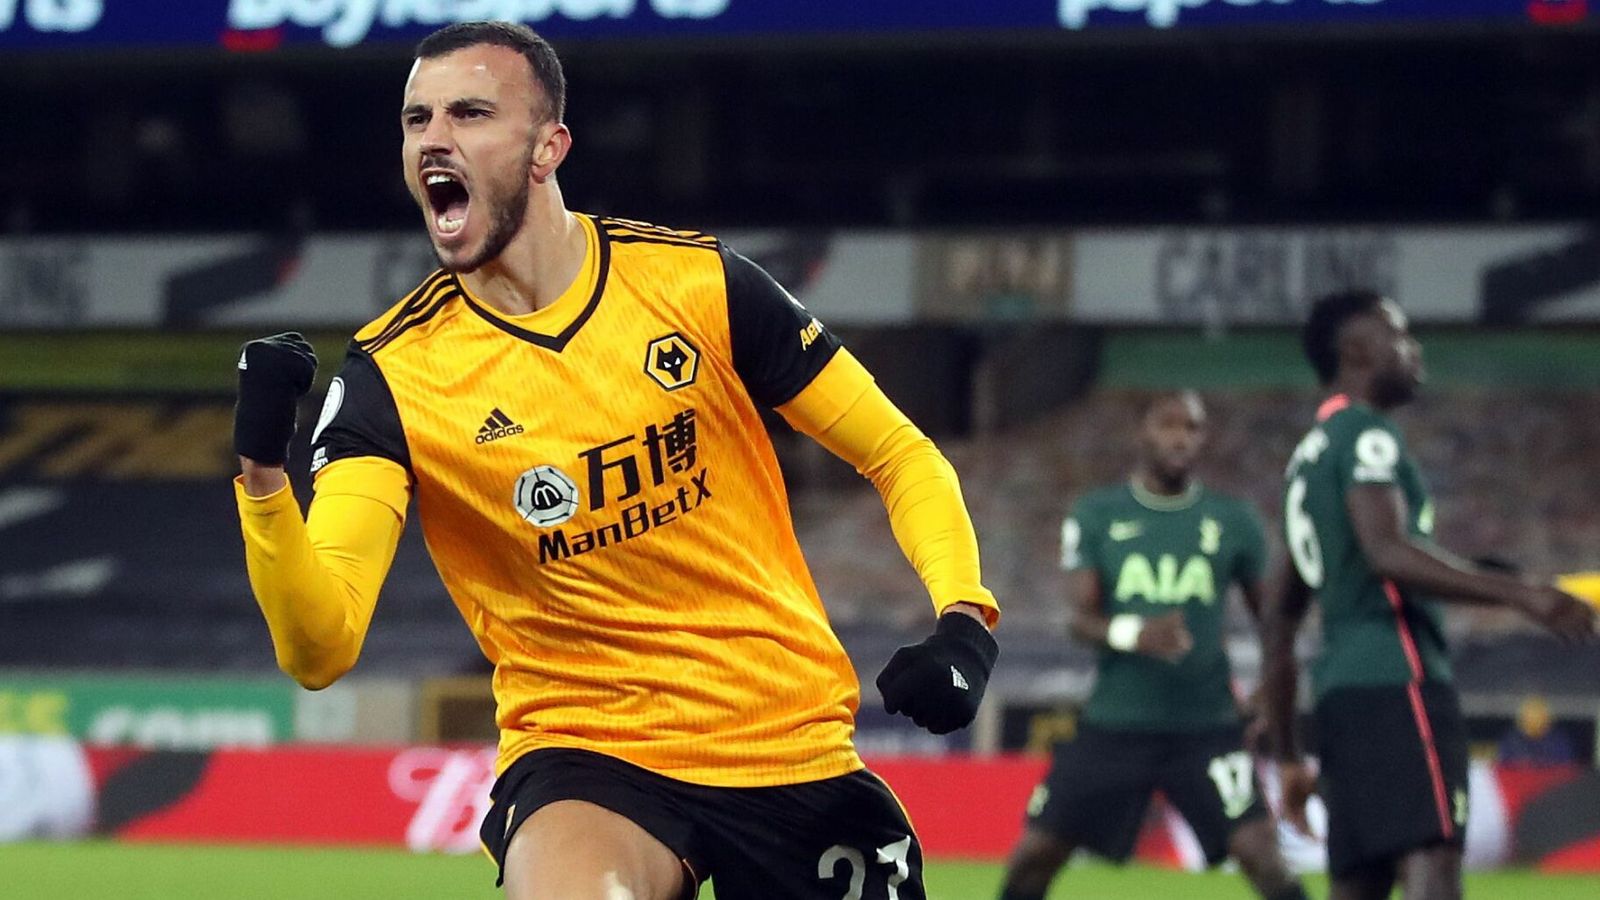 Wolves 1-1 Tottenham: Romain Size’s late goal gets the Wolves a decent point |  Football News